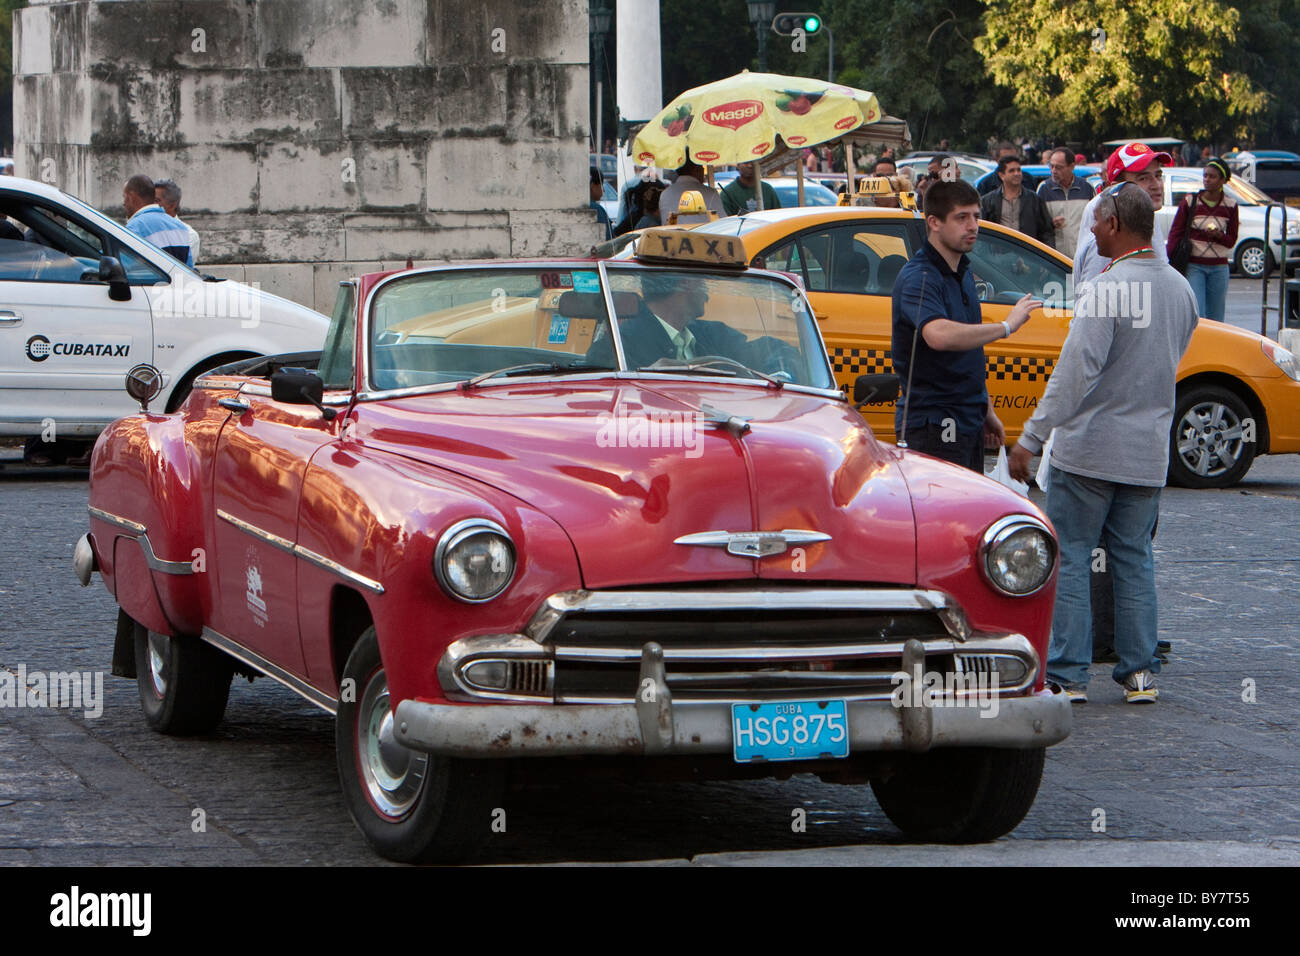 Cuba, Havana. American Cars from the 1950s Serve as Taxis in Cuba. This is a 1951 Chevrolet. Stock Photo